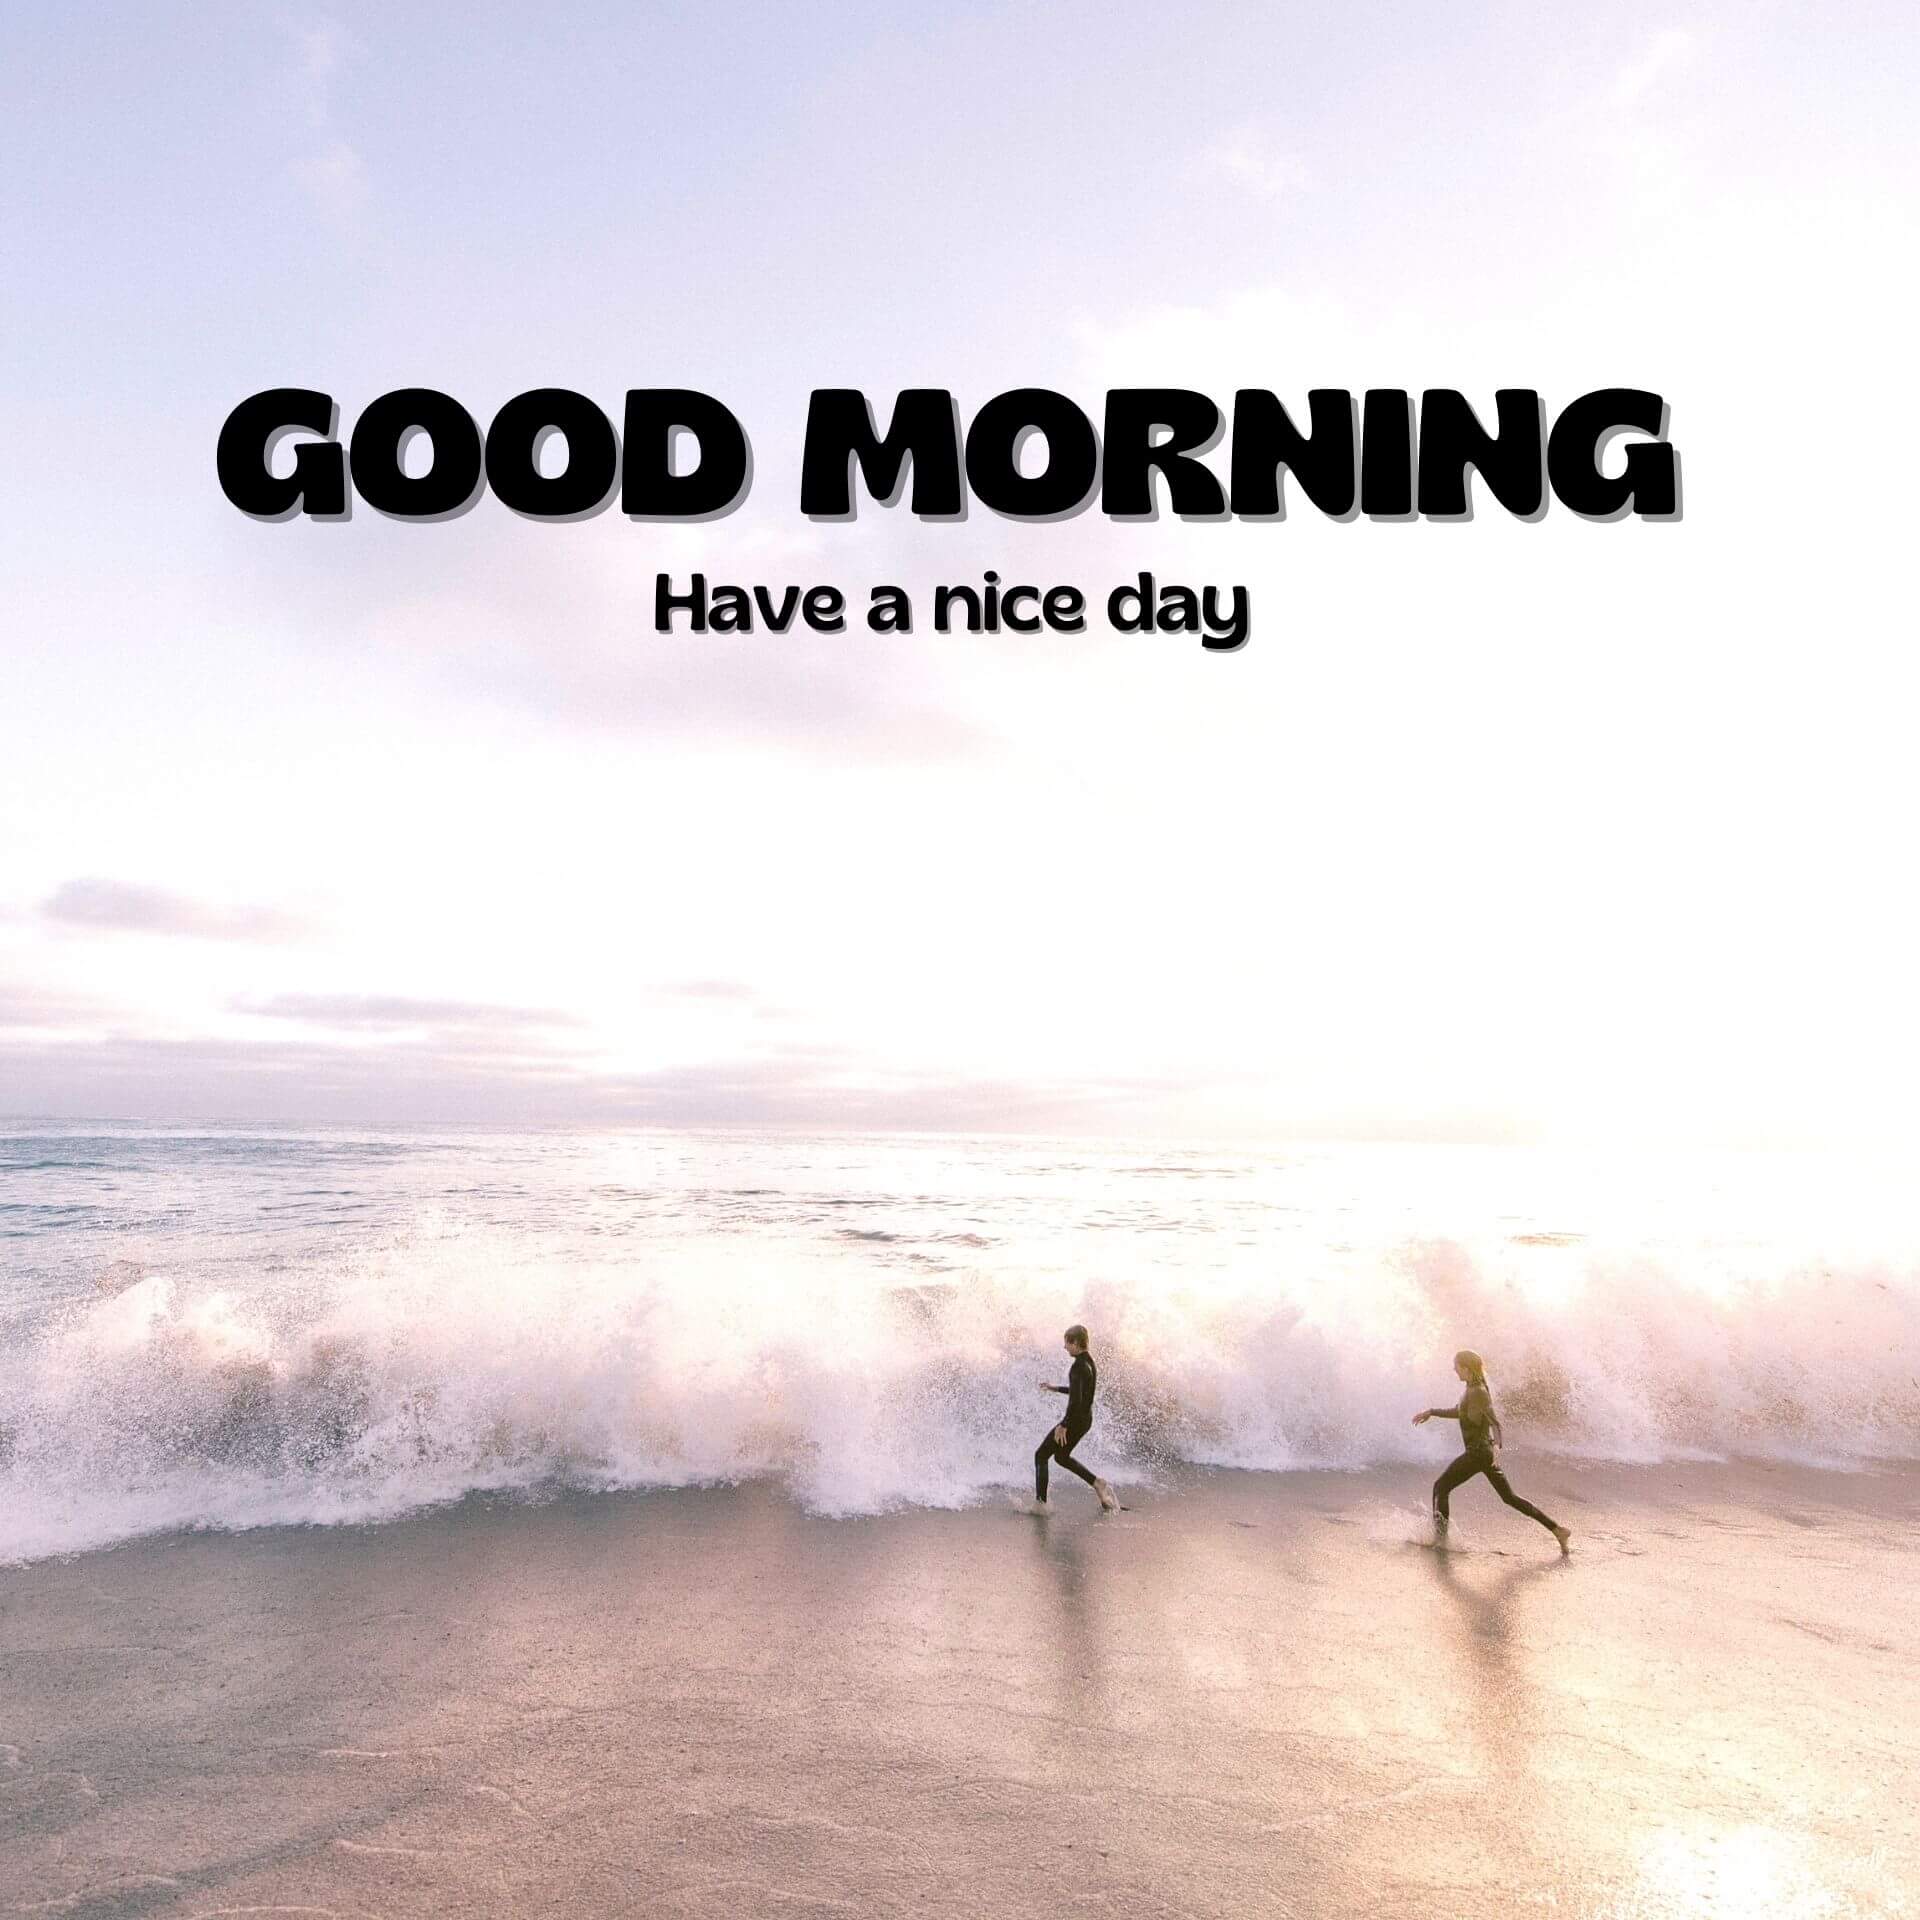 Good Morning 1080p photo New Download